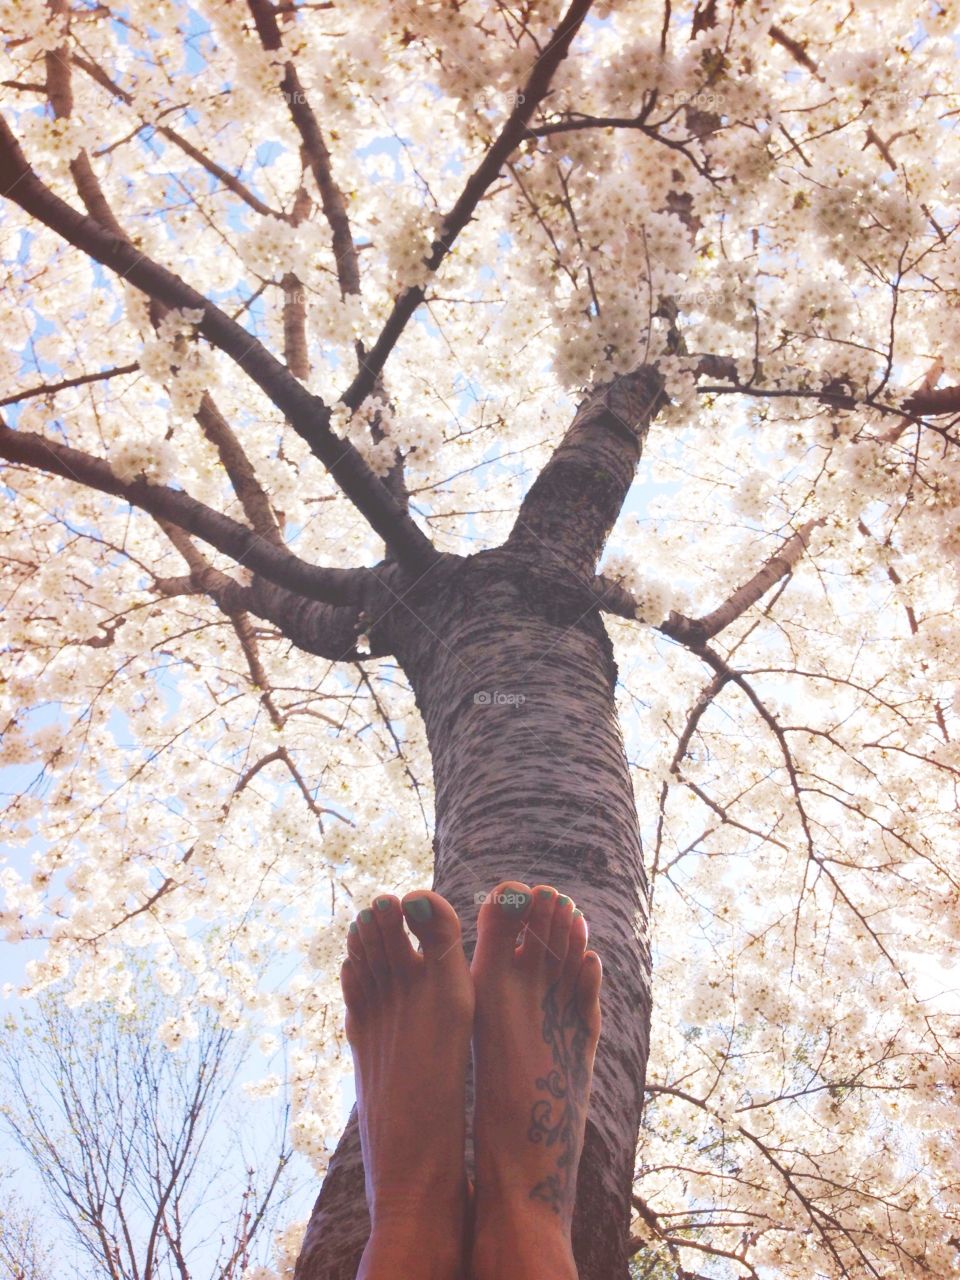 Upside down . Cherry blossoms 